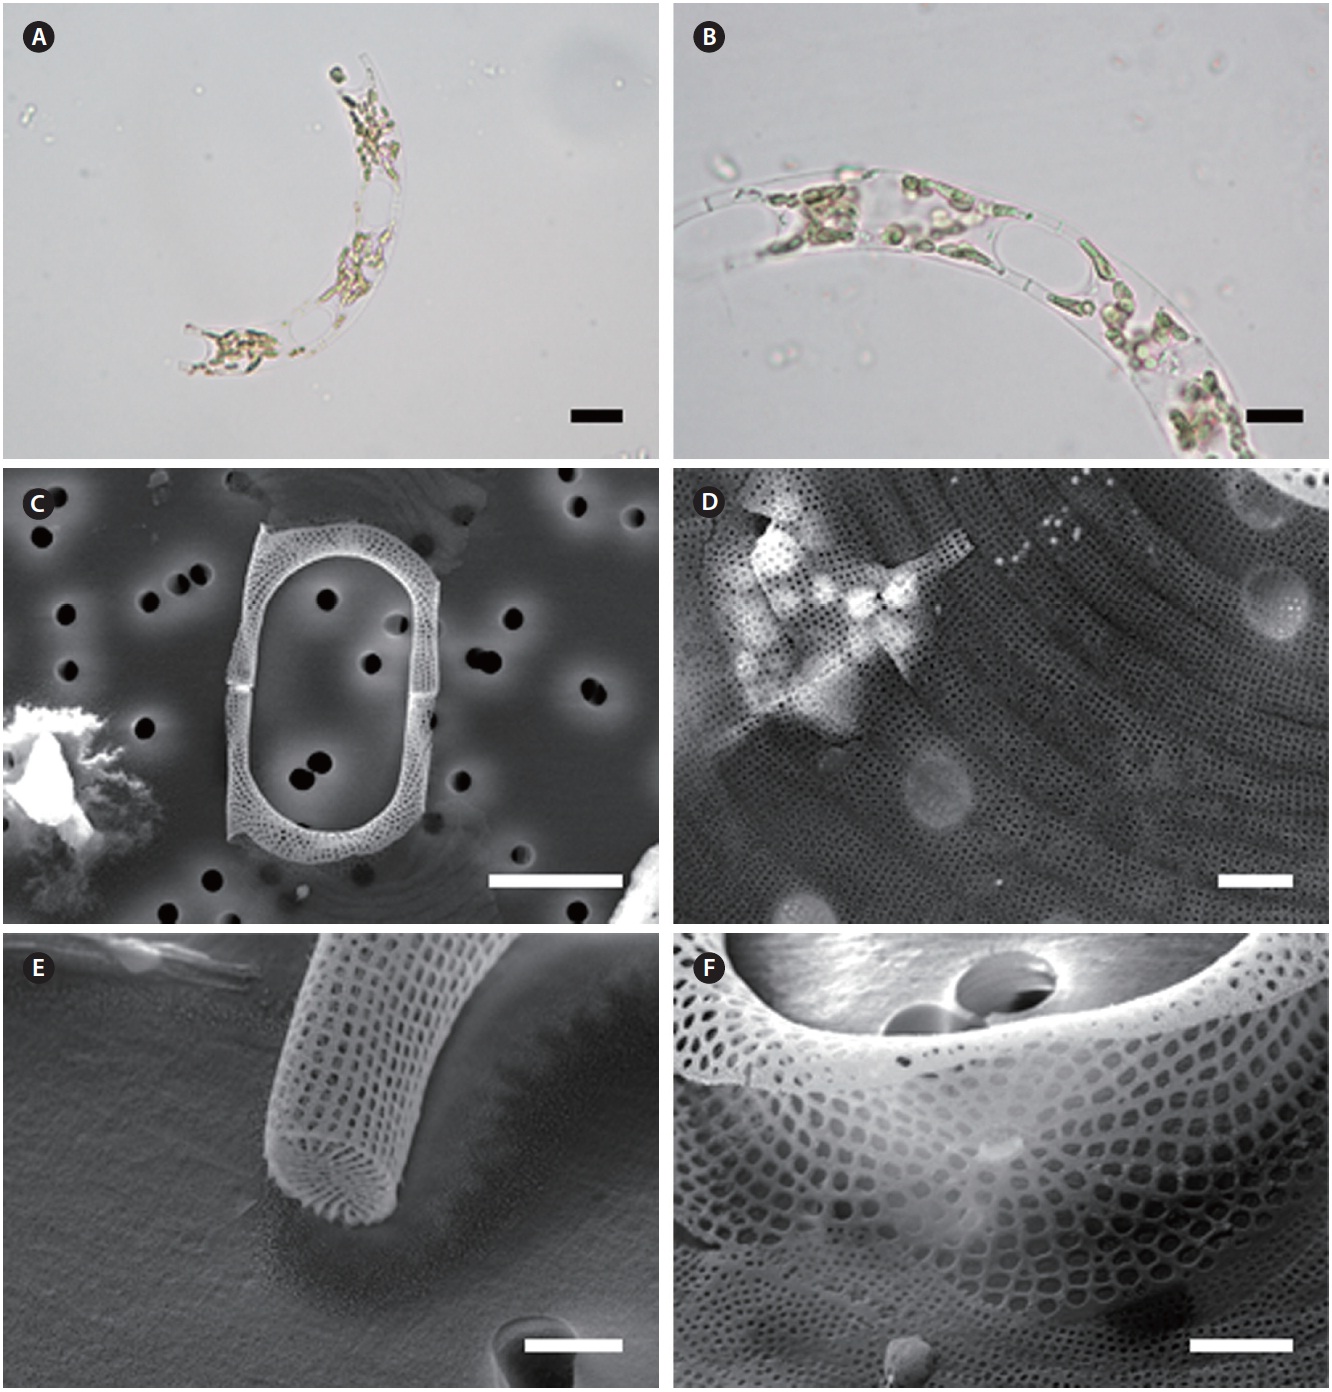 Eucampia cornuta. (A) Colony form with several small plastids, light microscopy (LM). (B) Two-celled colony, large elliptical aperture shape, LM. (C) Long and narrow cylindrical elevations, scanning electron microscopy (SEM). (D) Intercalary bands with rows of puncta, SEM. (E) Ocellus with linear ribs, SEM. (F) Labiate process on valve face in the internal view, SEM. Scale bars represent: A & B, 10 μm; C & F, 1 μm; D & E, 2 μm.